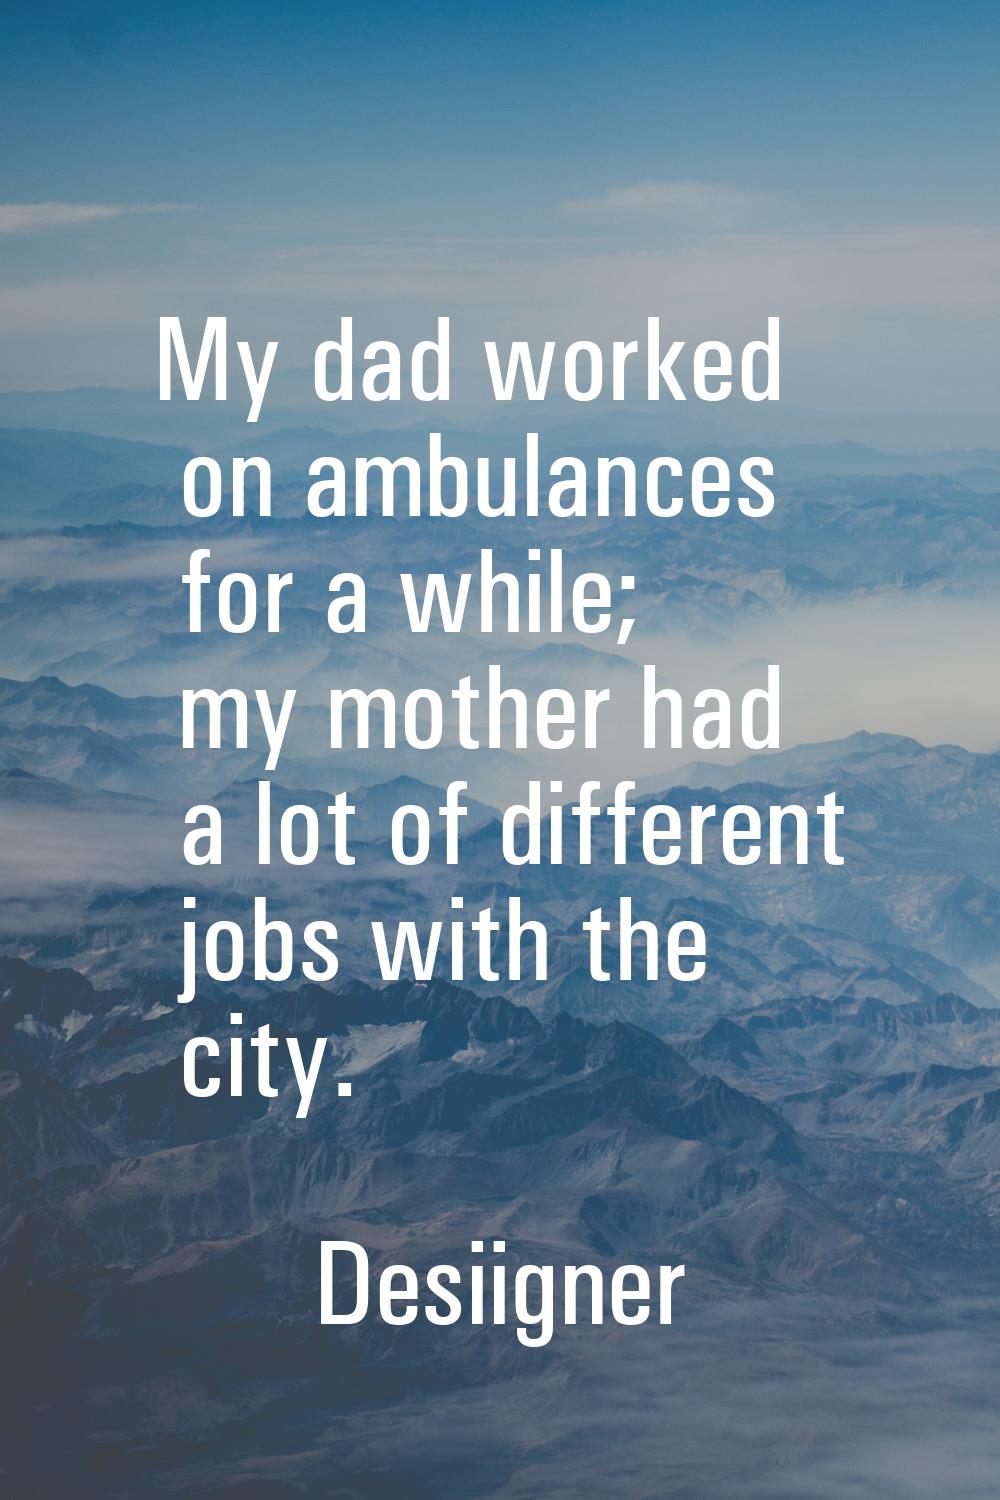 My dad worked on ambulances for a while; my mother had a lot of different jobs with the city.